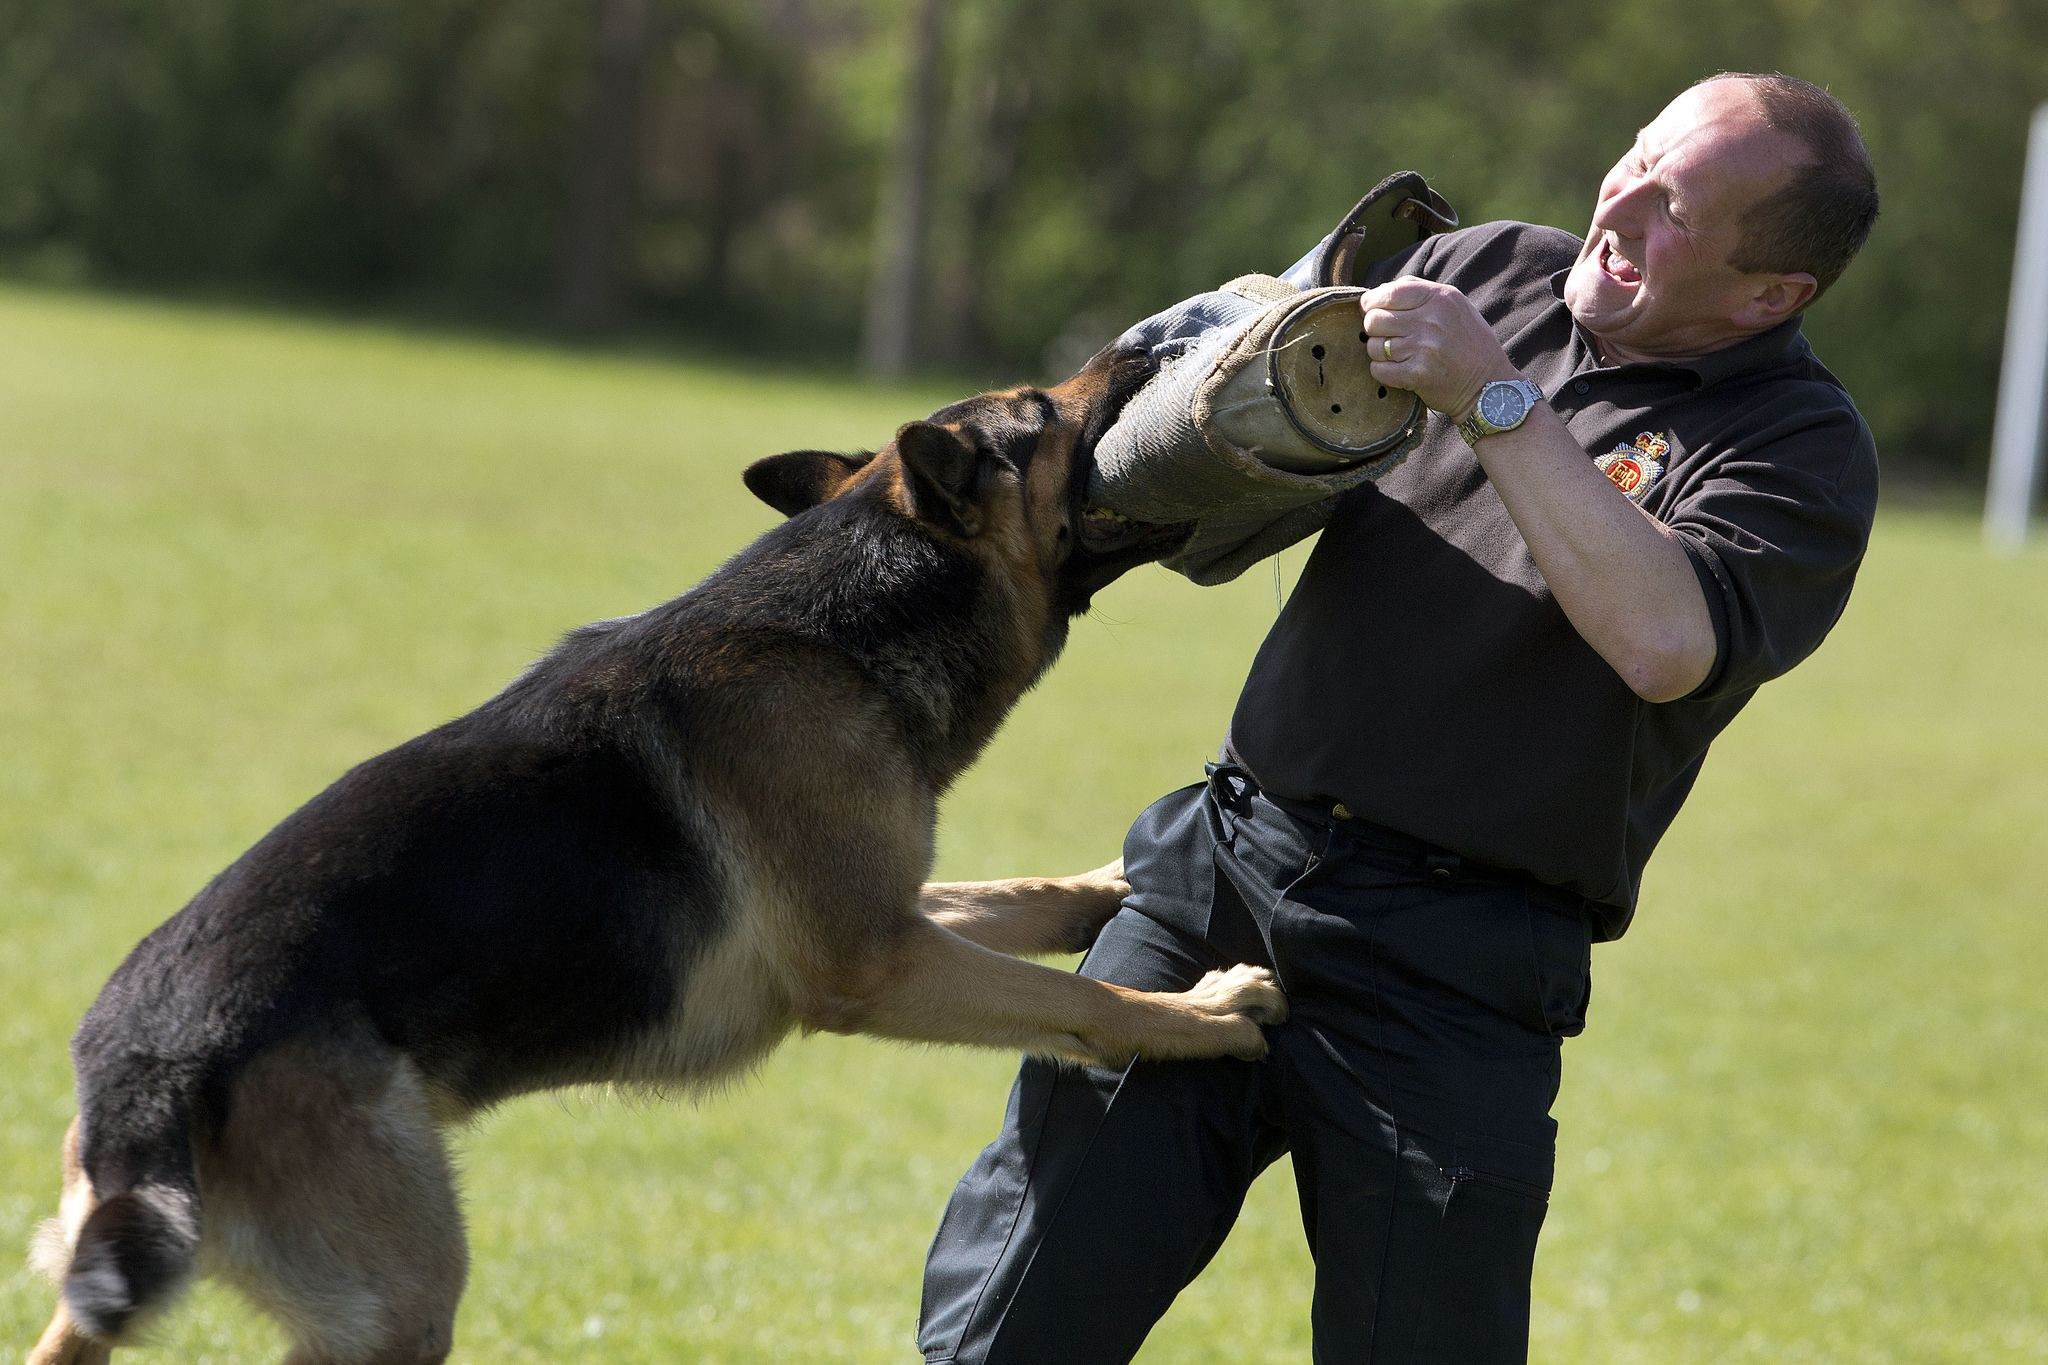 The Shocking Price Tag Of A Fully Trained German Shepherd Revealed!